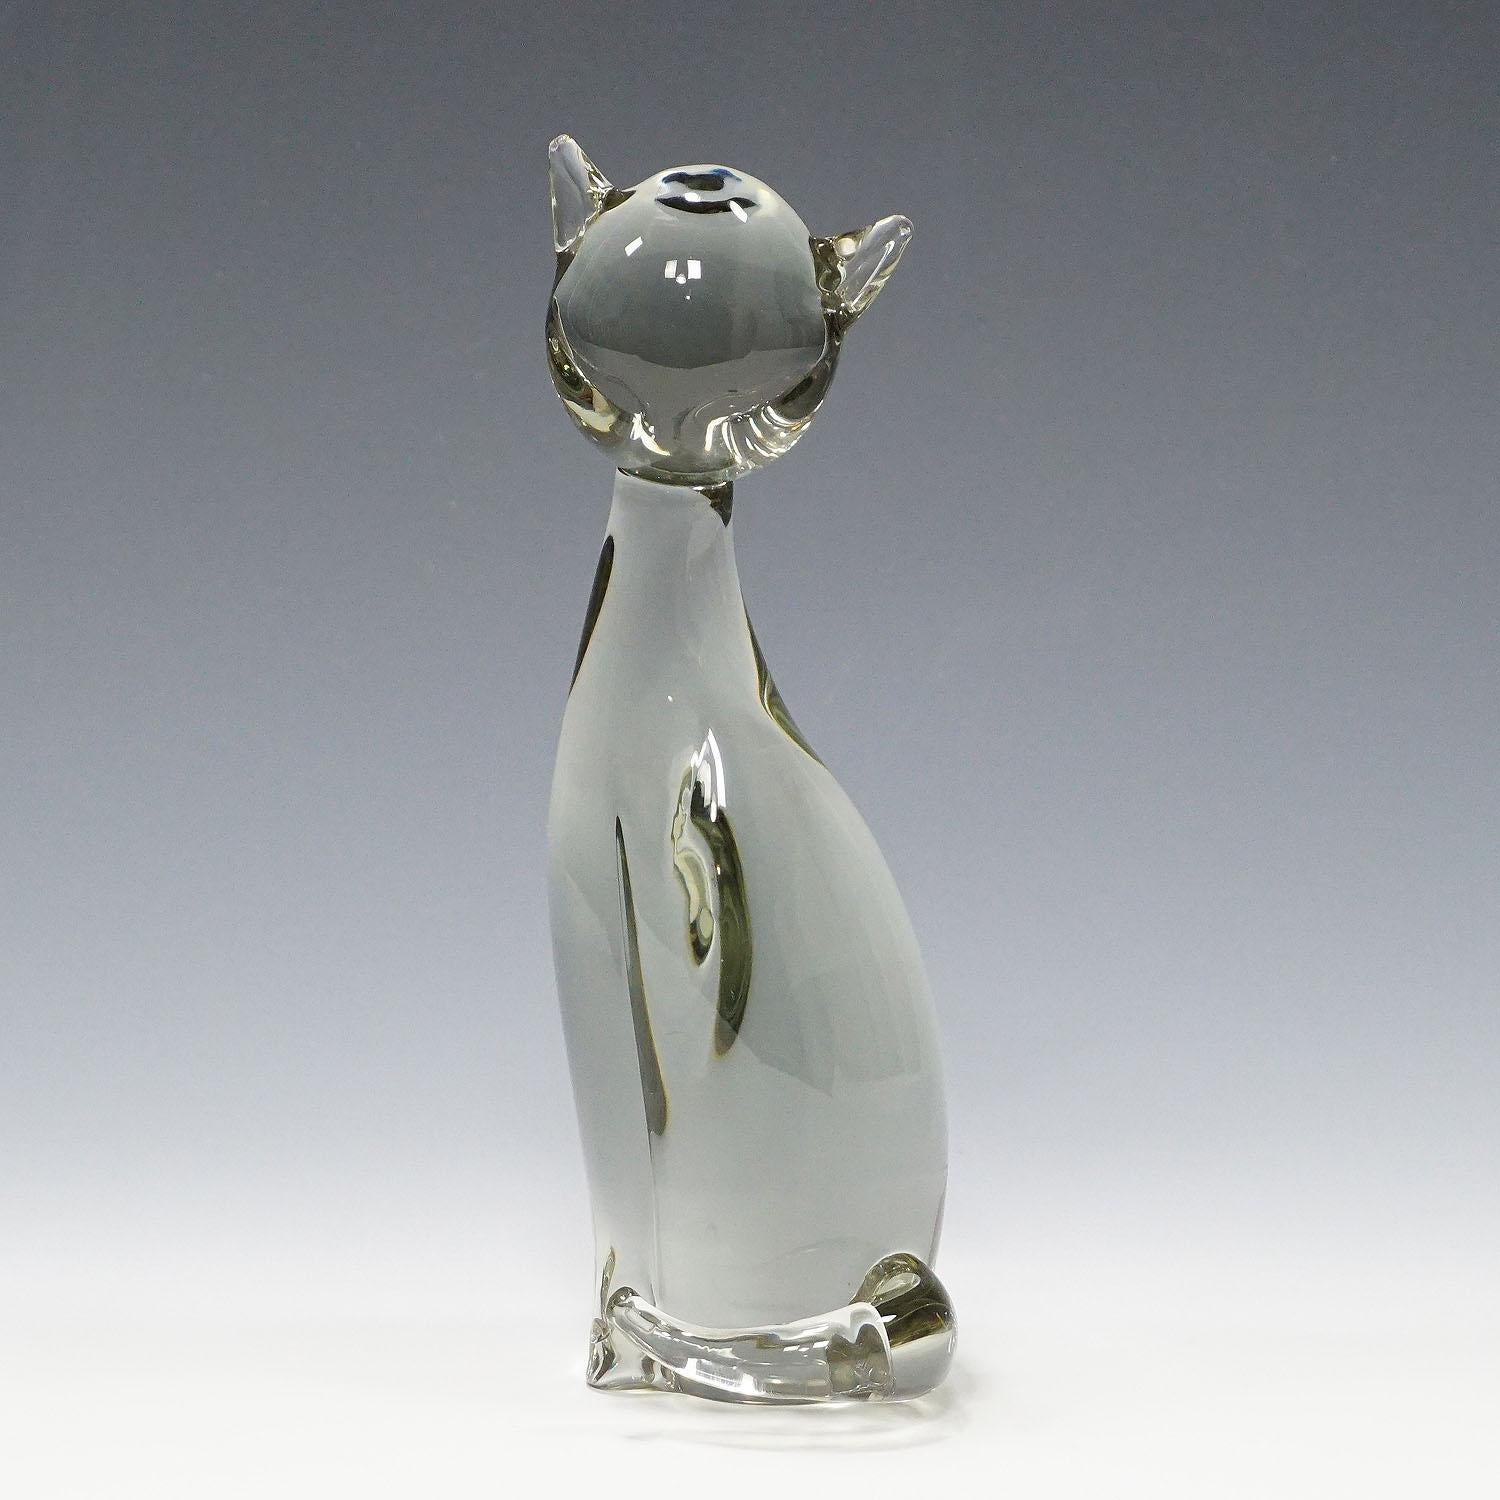 Sculpture of a Stylized Cat Designed by Livio Seguso ca. 1970s

A cute sculpture of a stylized cat in smoke grey glass. Hand made in the Gral glass manufactory, Germany. It was designed by Livio Seguso ca. 1970. With factory lable and incised